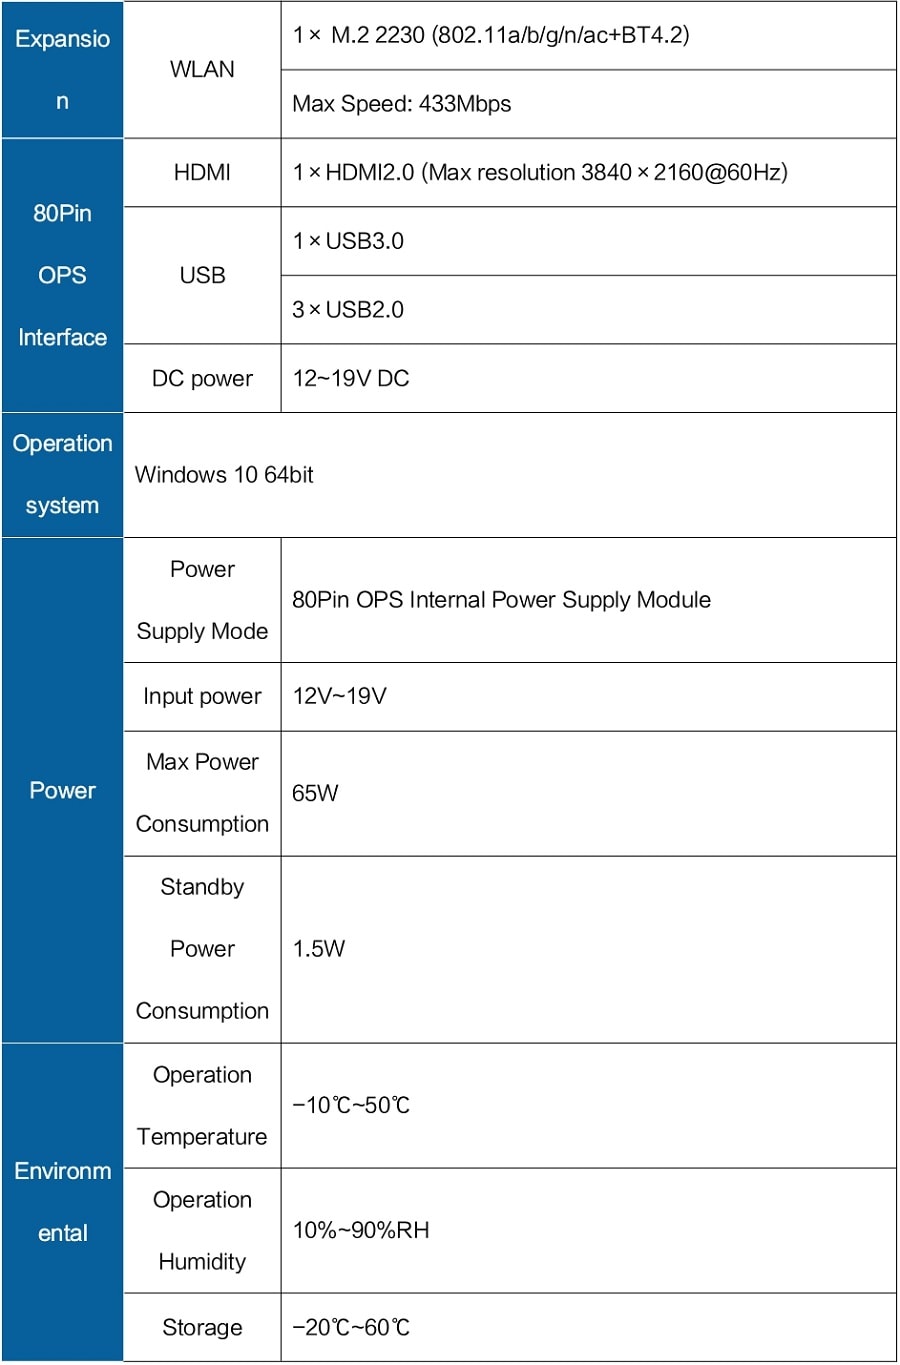 Maxhub Pc Module Ops62a Product Specification Tanphatvn.com20220609 Page 0003